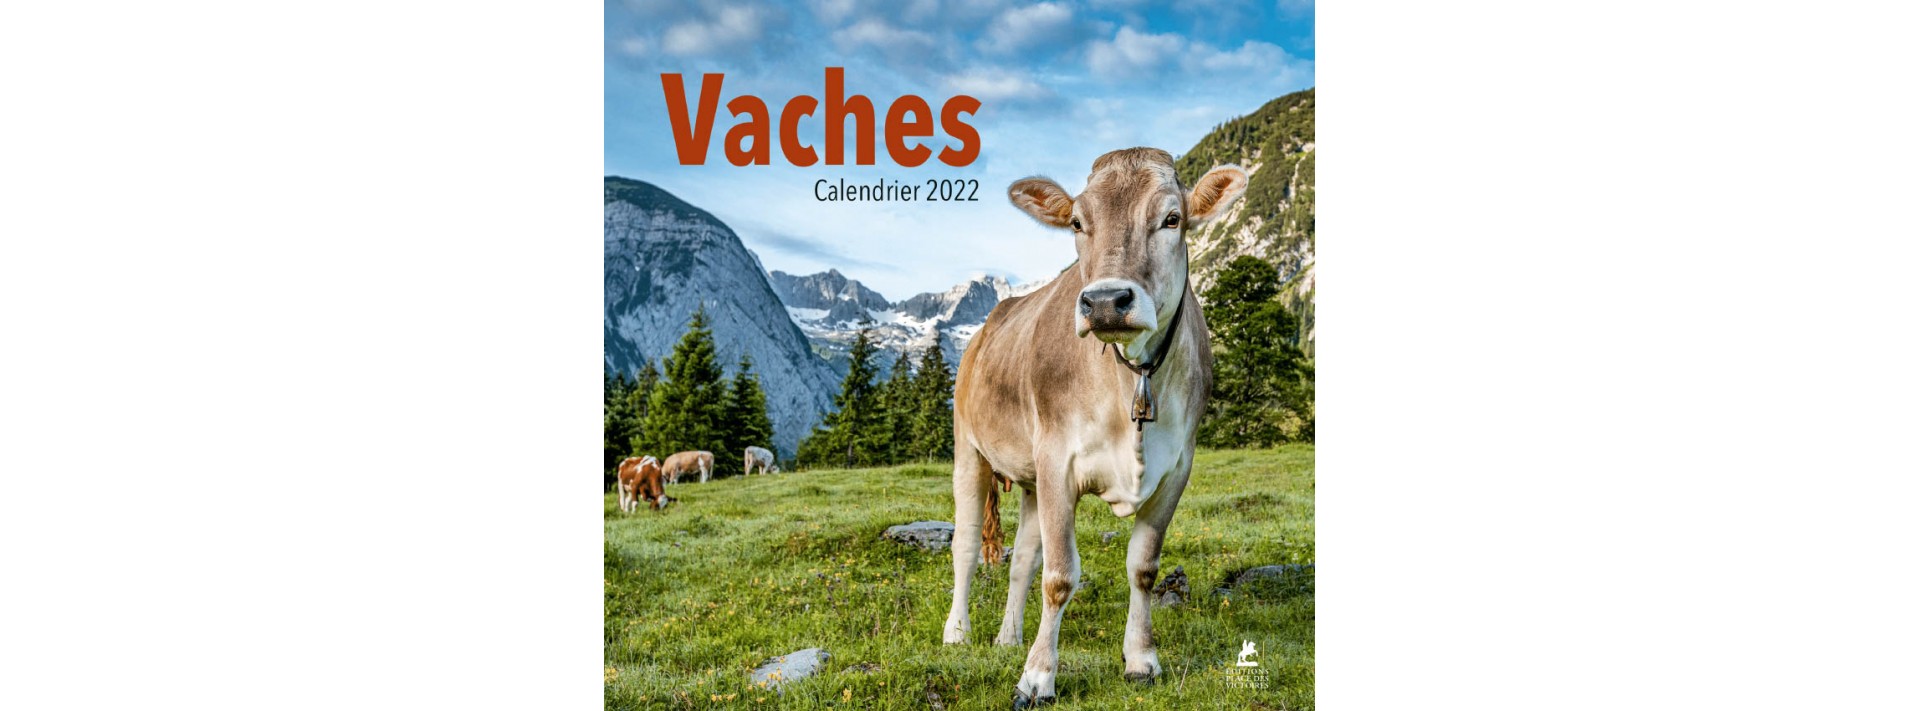 Vaches - Calendrier 2022